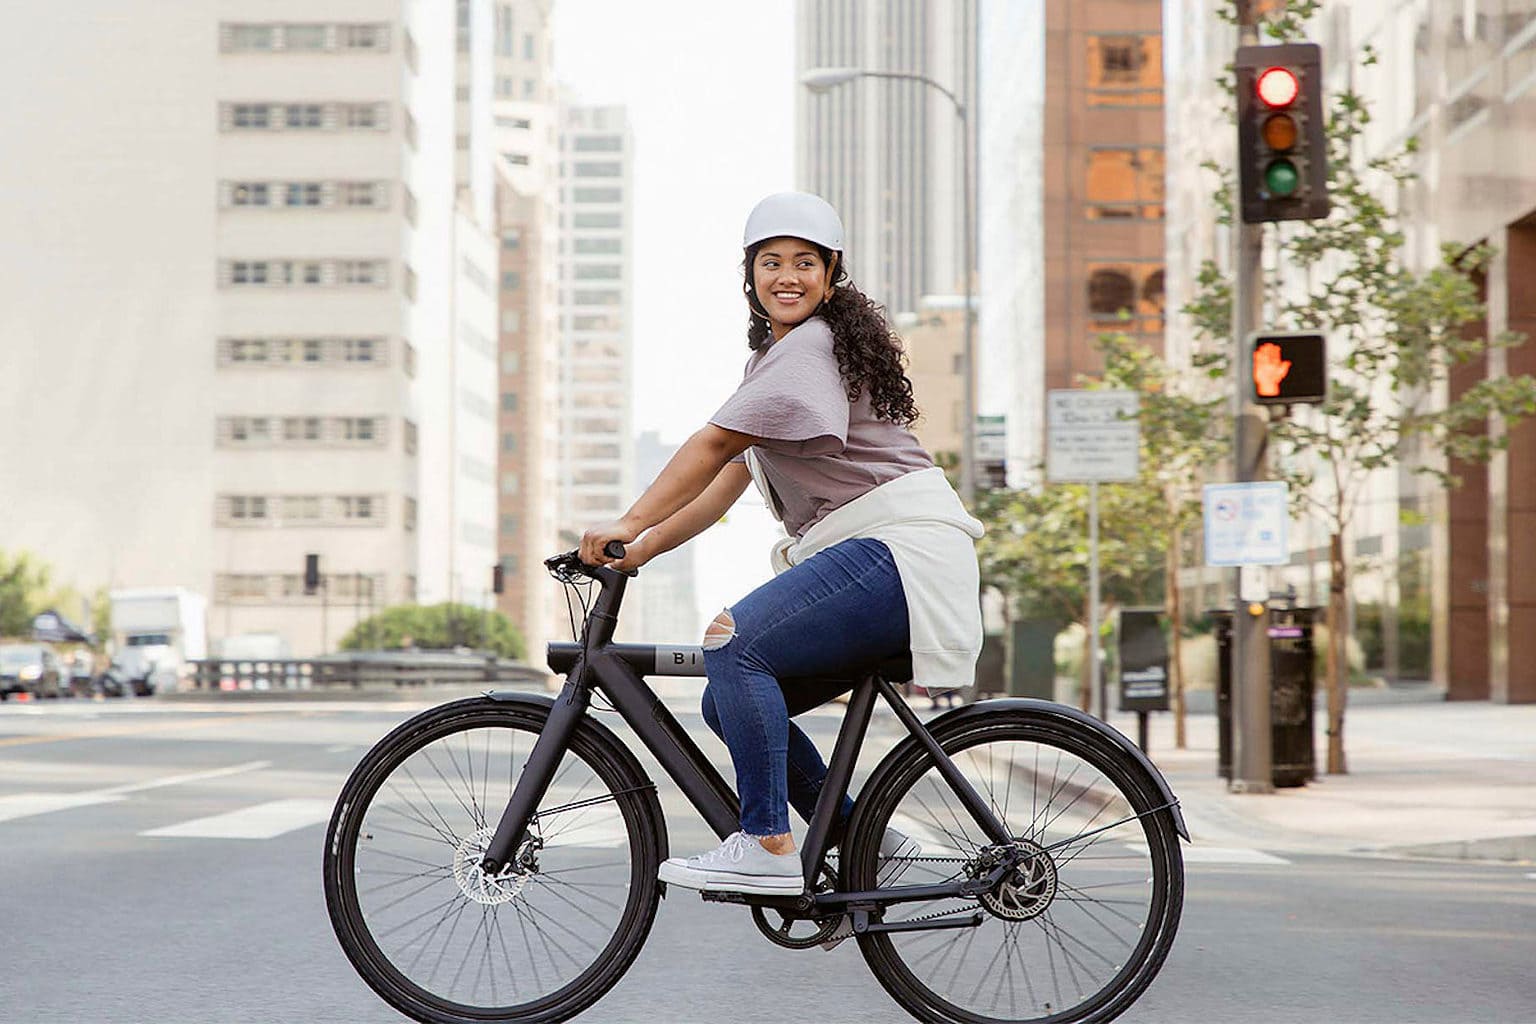 Upgrade your transportation approach by picking up an e-bike for 60% off.